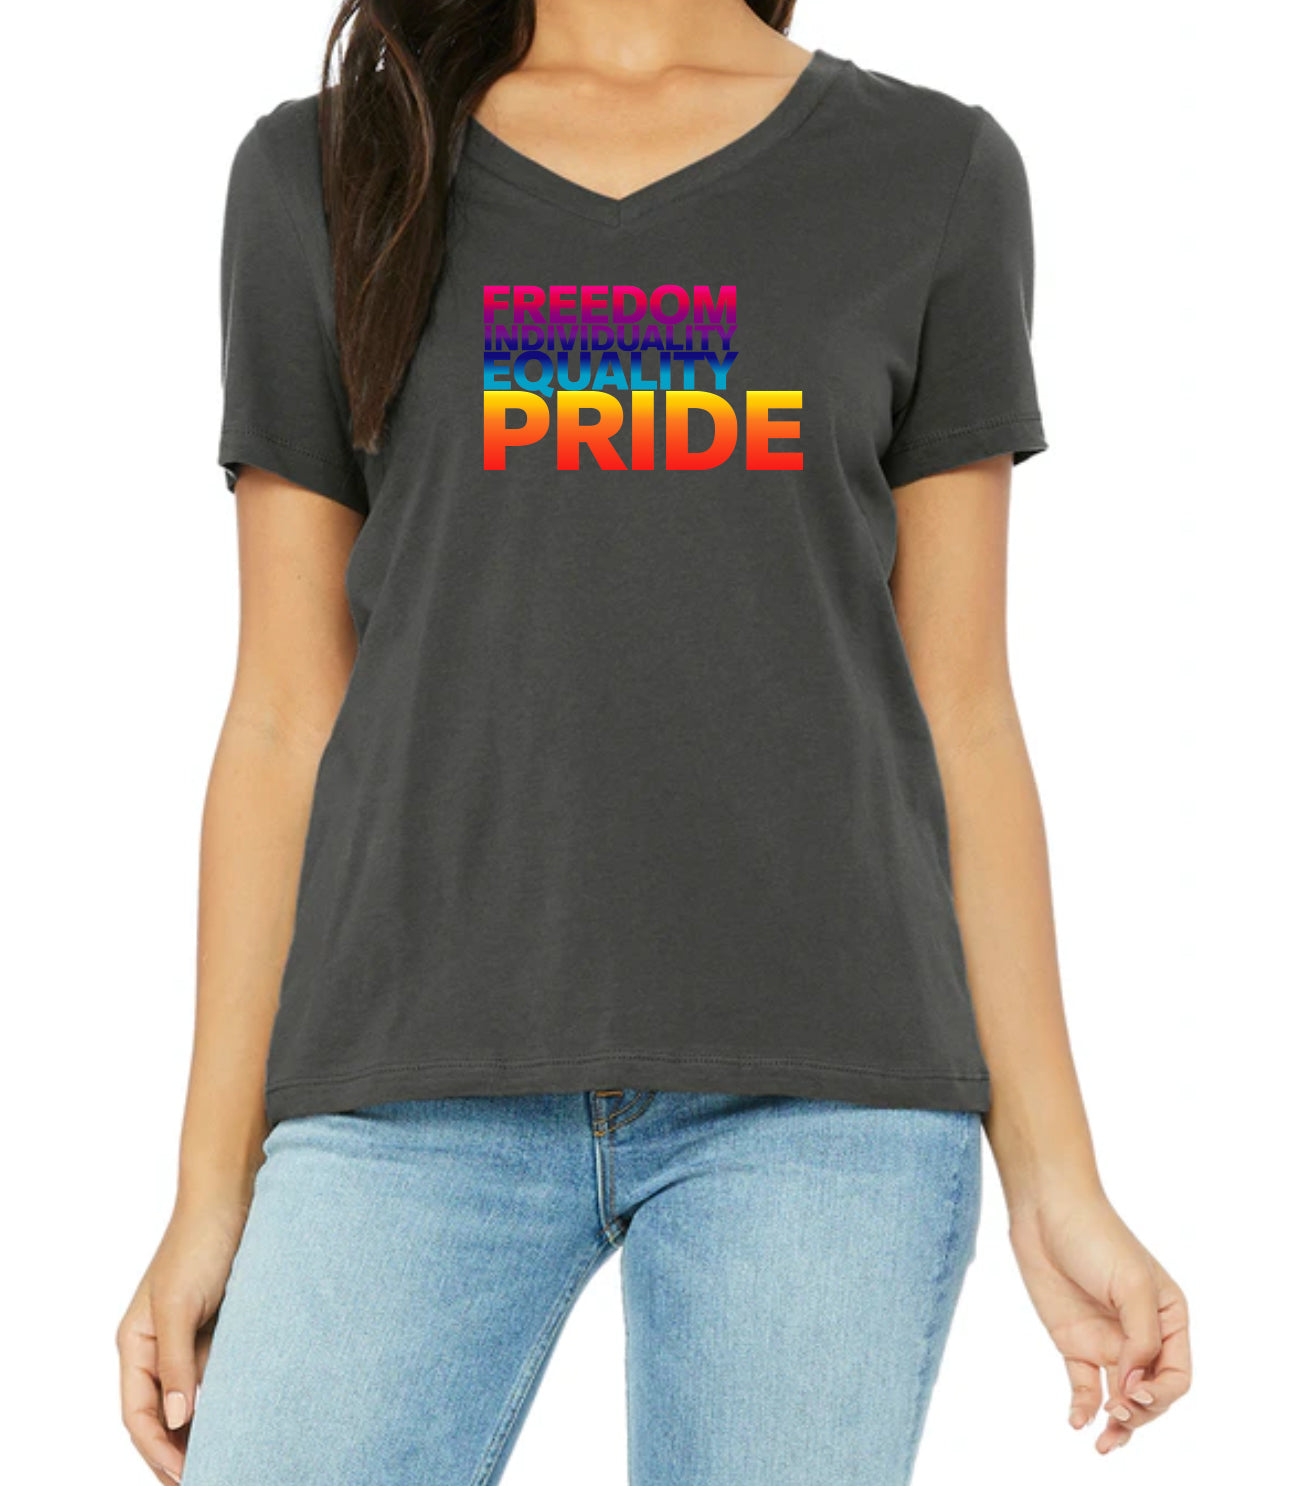 Freedom, Equality, Individuality, Pride V Neck T-Shirt - Available in More Colors